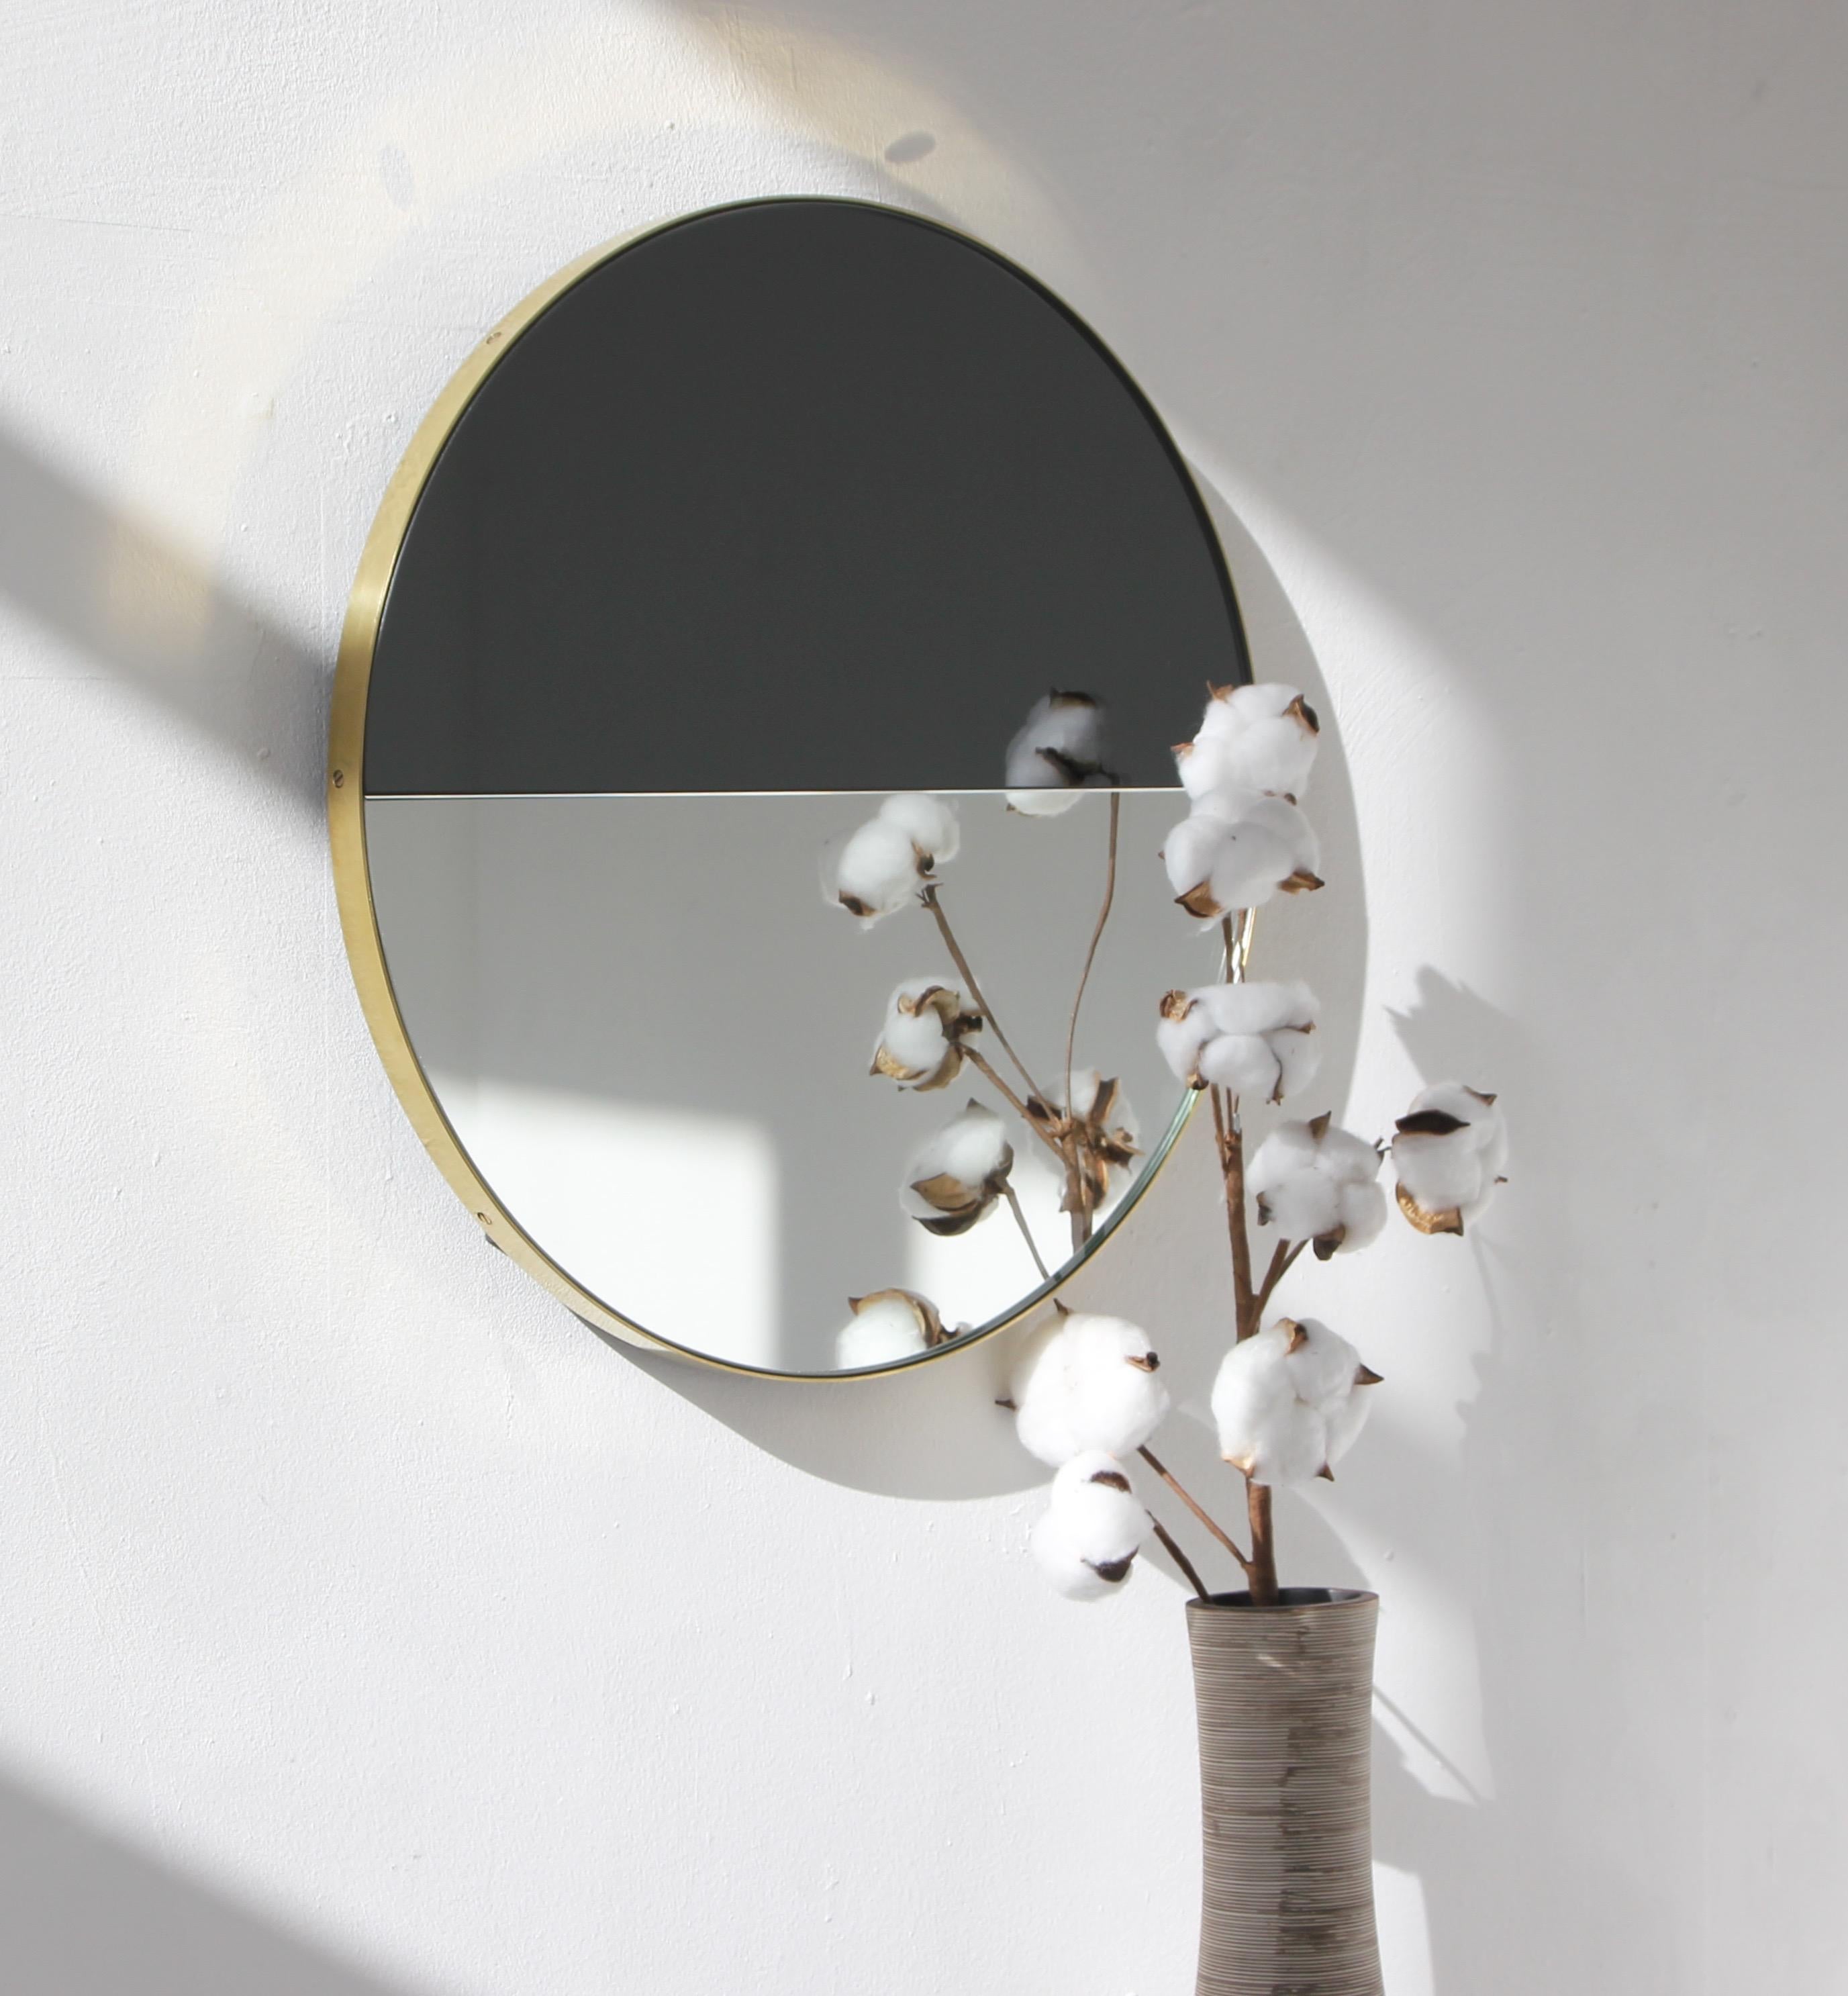 Modern Orbis Dualis Mixed Tint Contemporary Round Mirror with Brass Frame, Regular For Sale